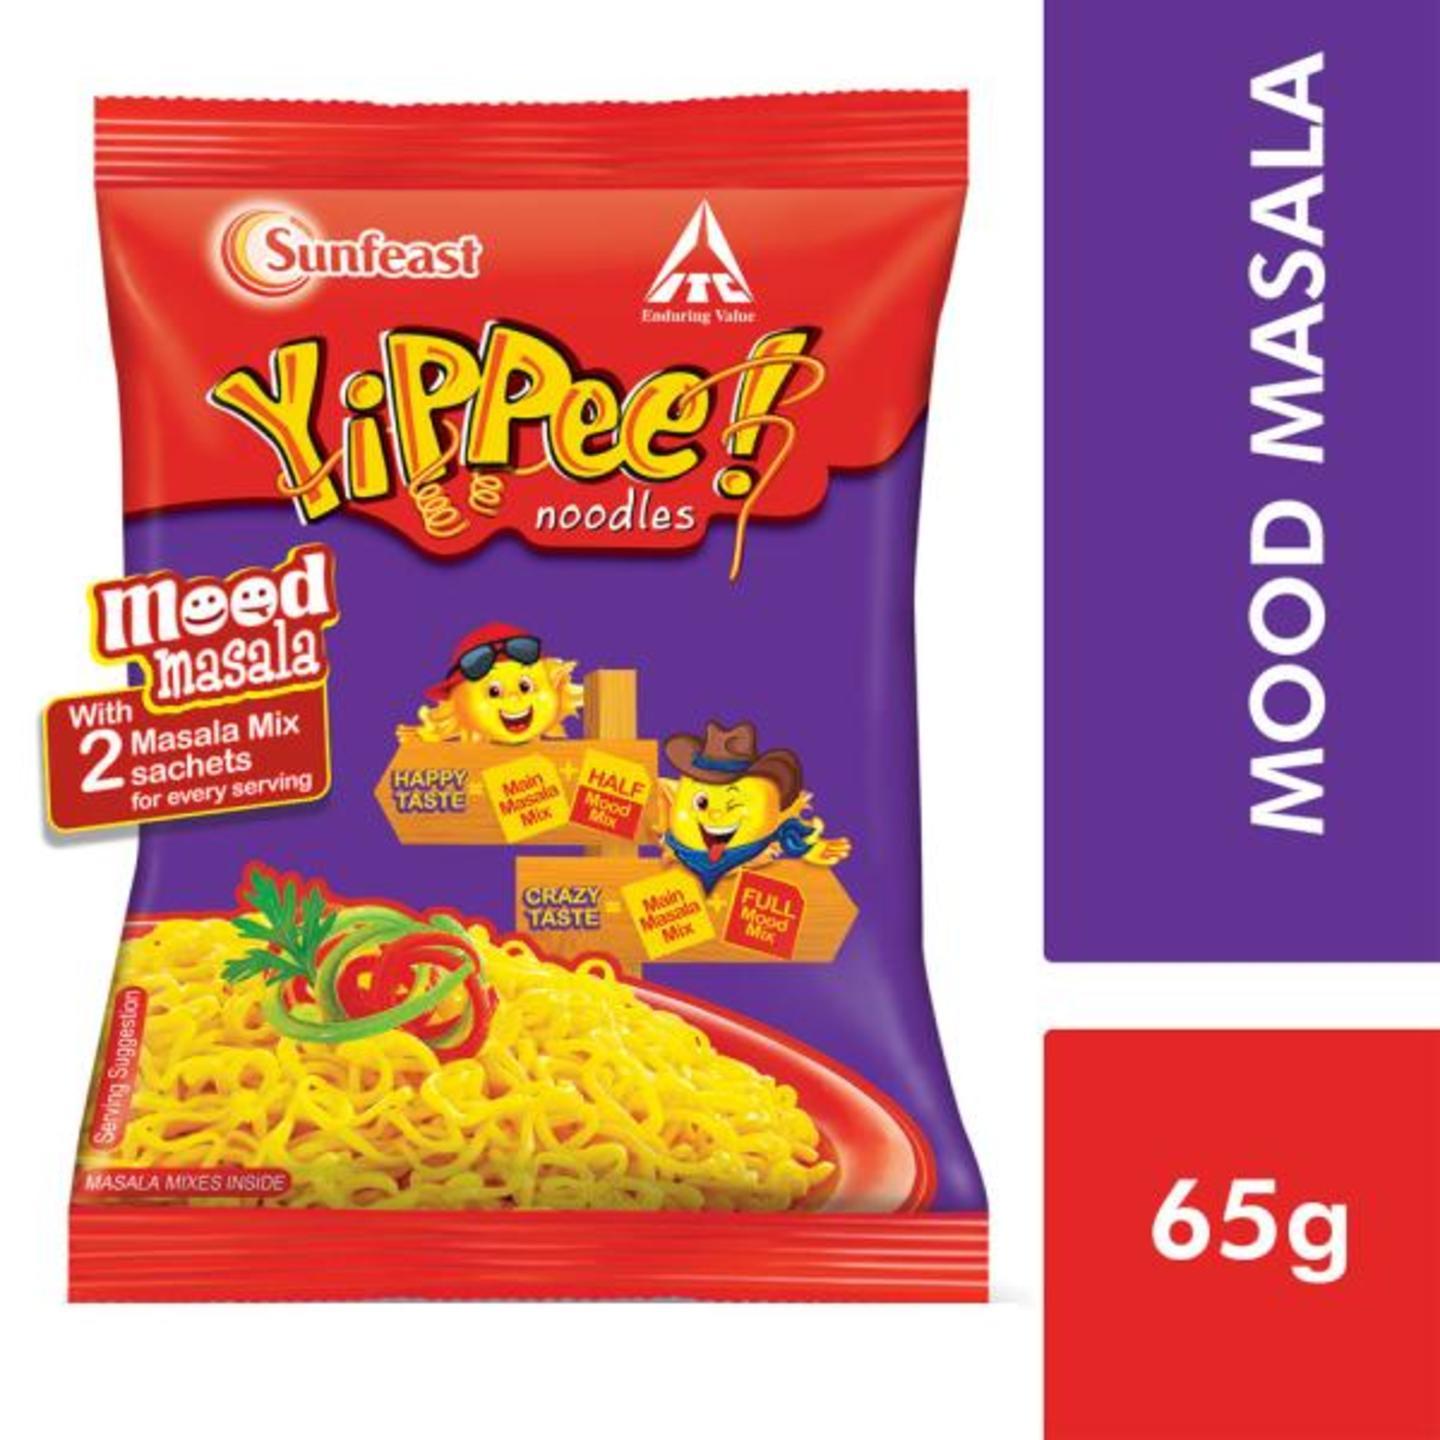 Sunfeast Yippee Mood Masala Instant Noodles 65 g